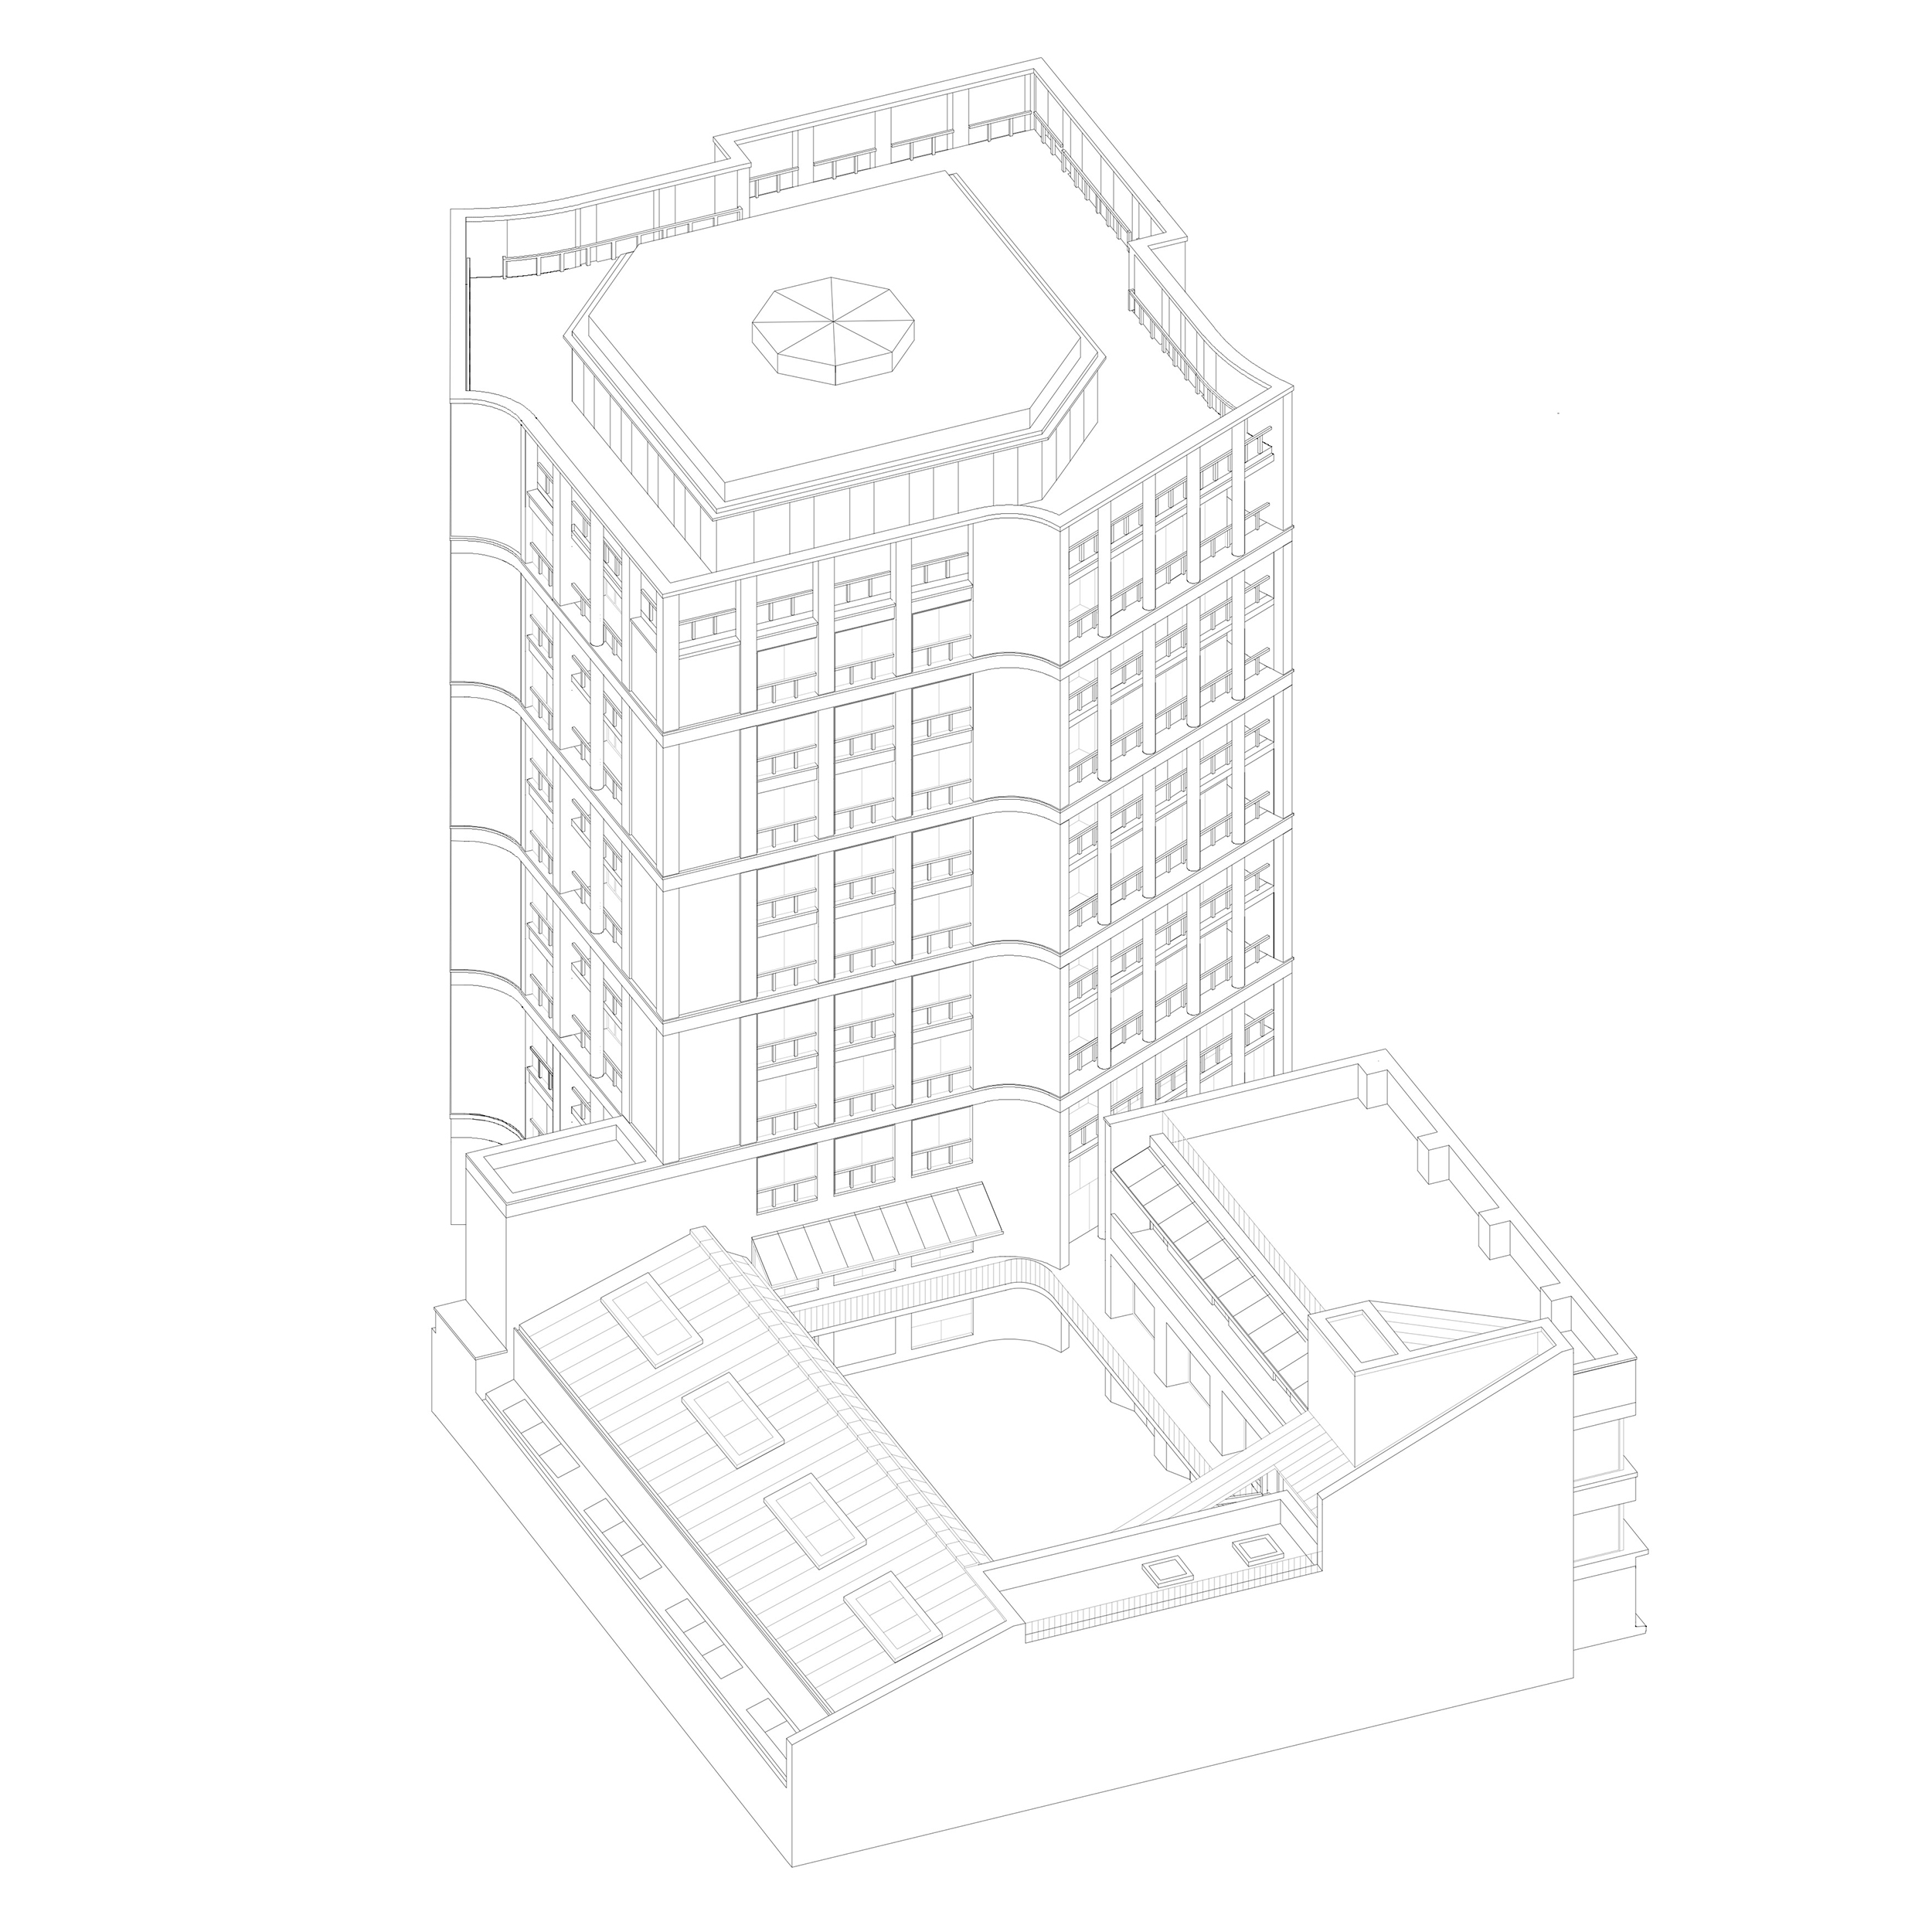 Axonometric from the west